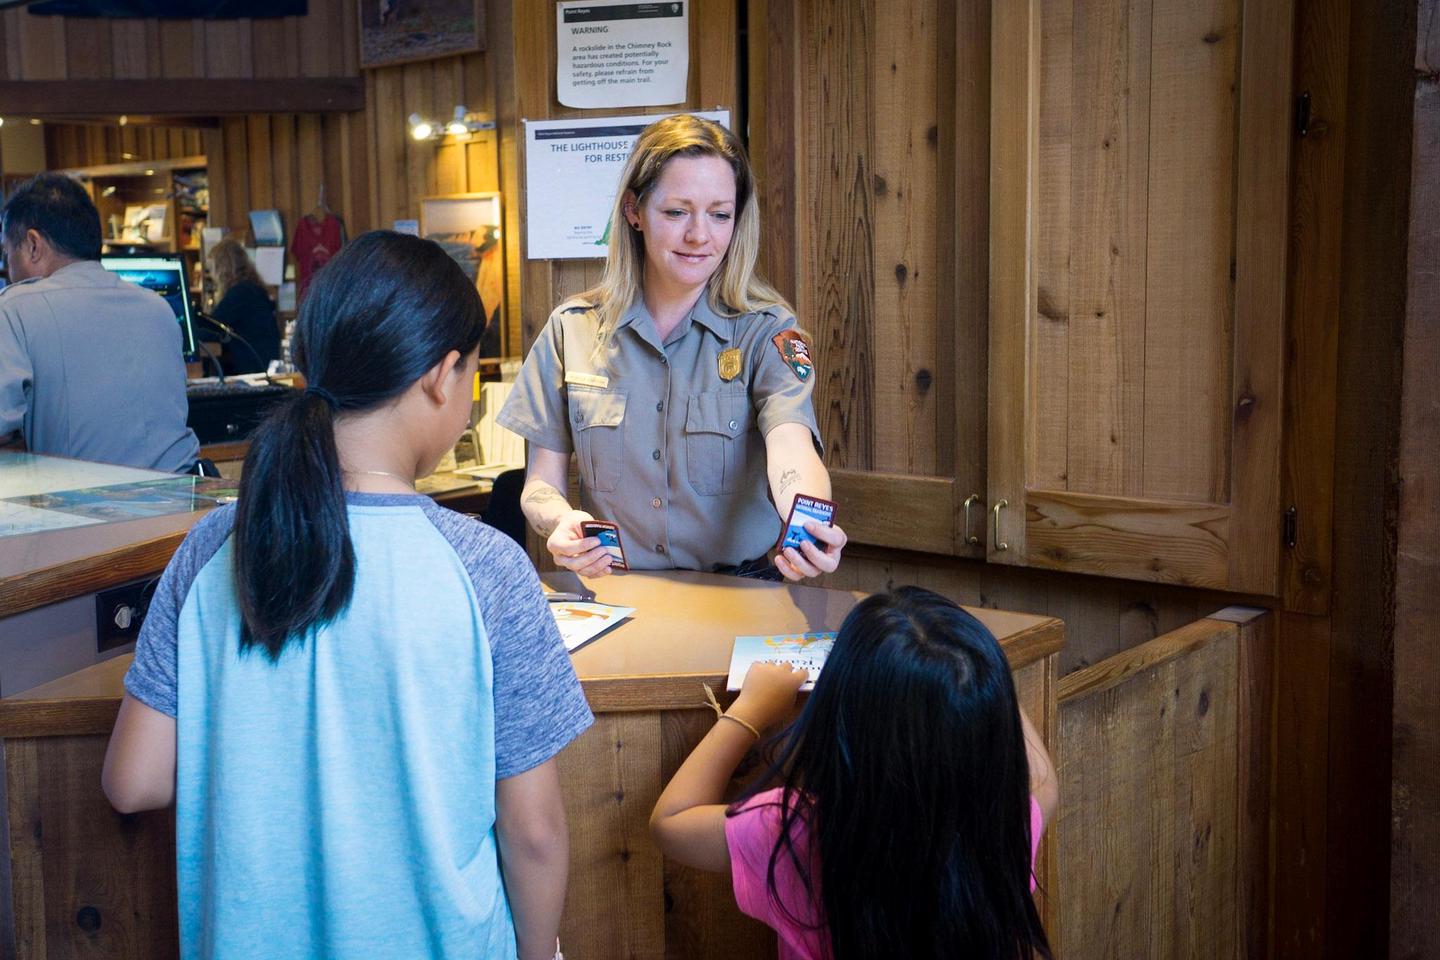 Bear Valley Visitor Center Information DeskRangers and volunteers are available at the information desk with maps, information and junior ranger badges!